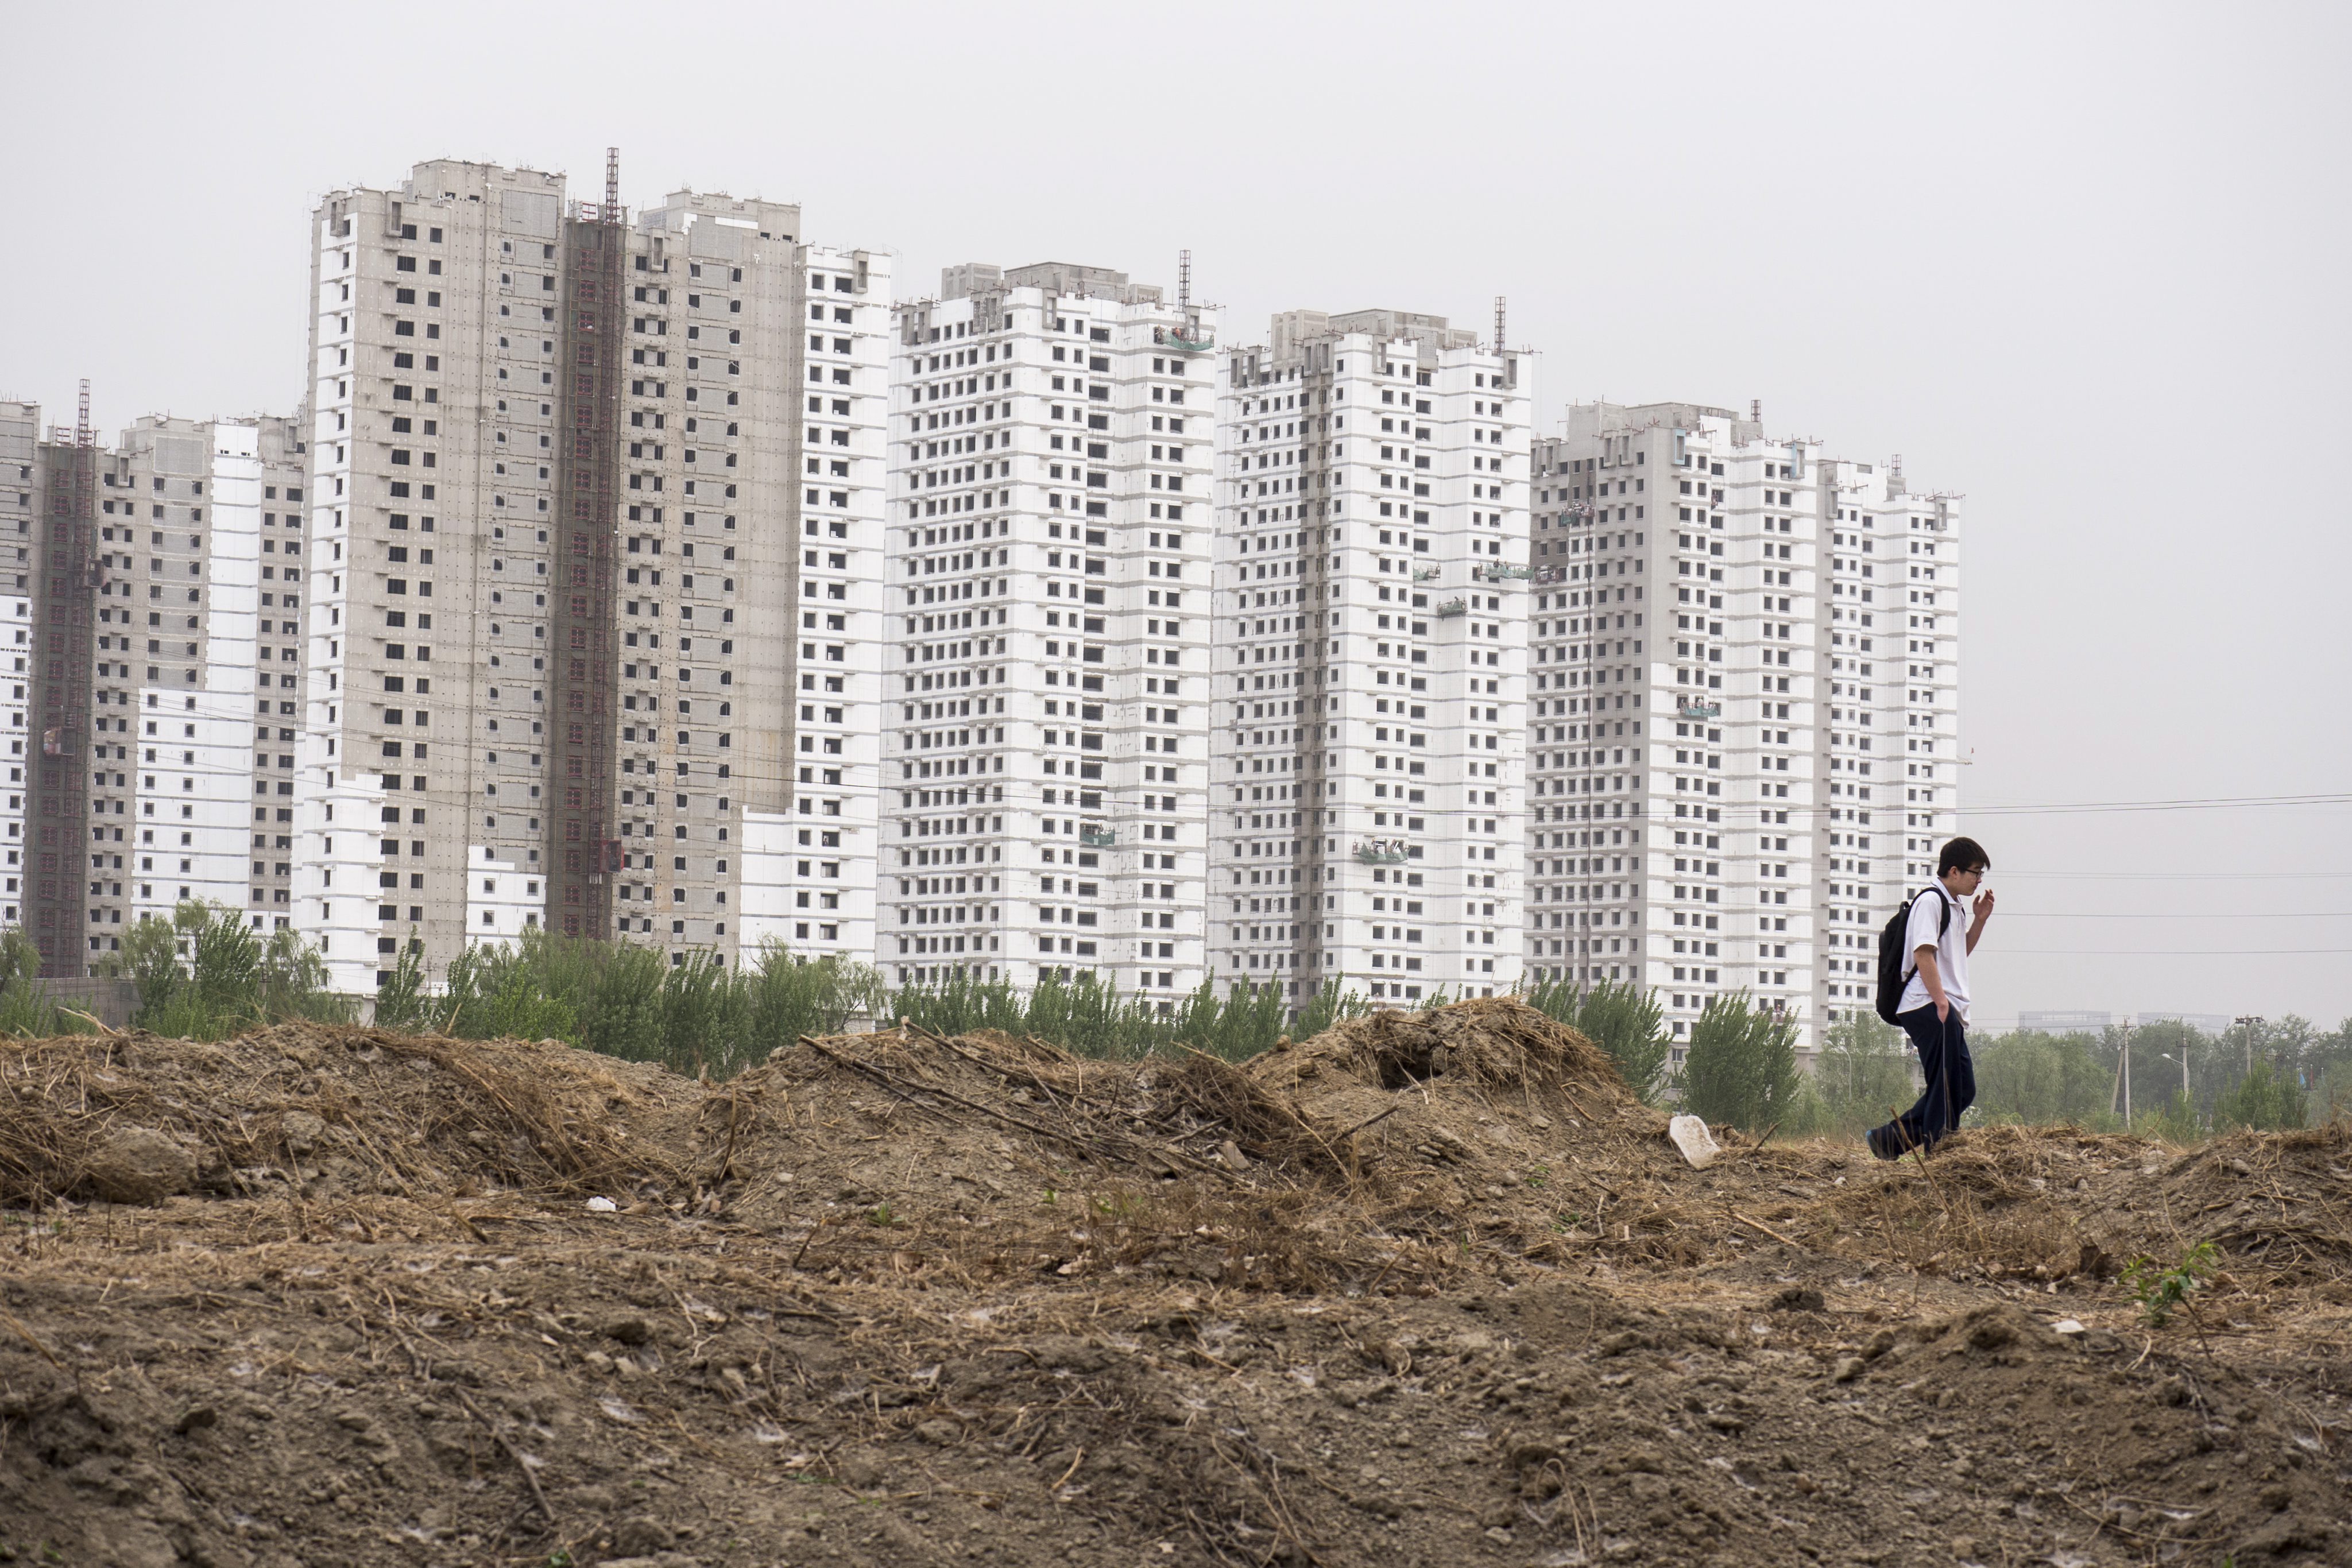 epa04167734 Highrise housing is under construction in the Maquanying district in the suburbs of Beijing, China, 15 April 2014. Housing data due to be published 18 April is anxiously awaited as a key indicator of China's slowing economy. EPA/ADRIAN BRADSHAW